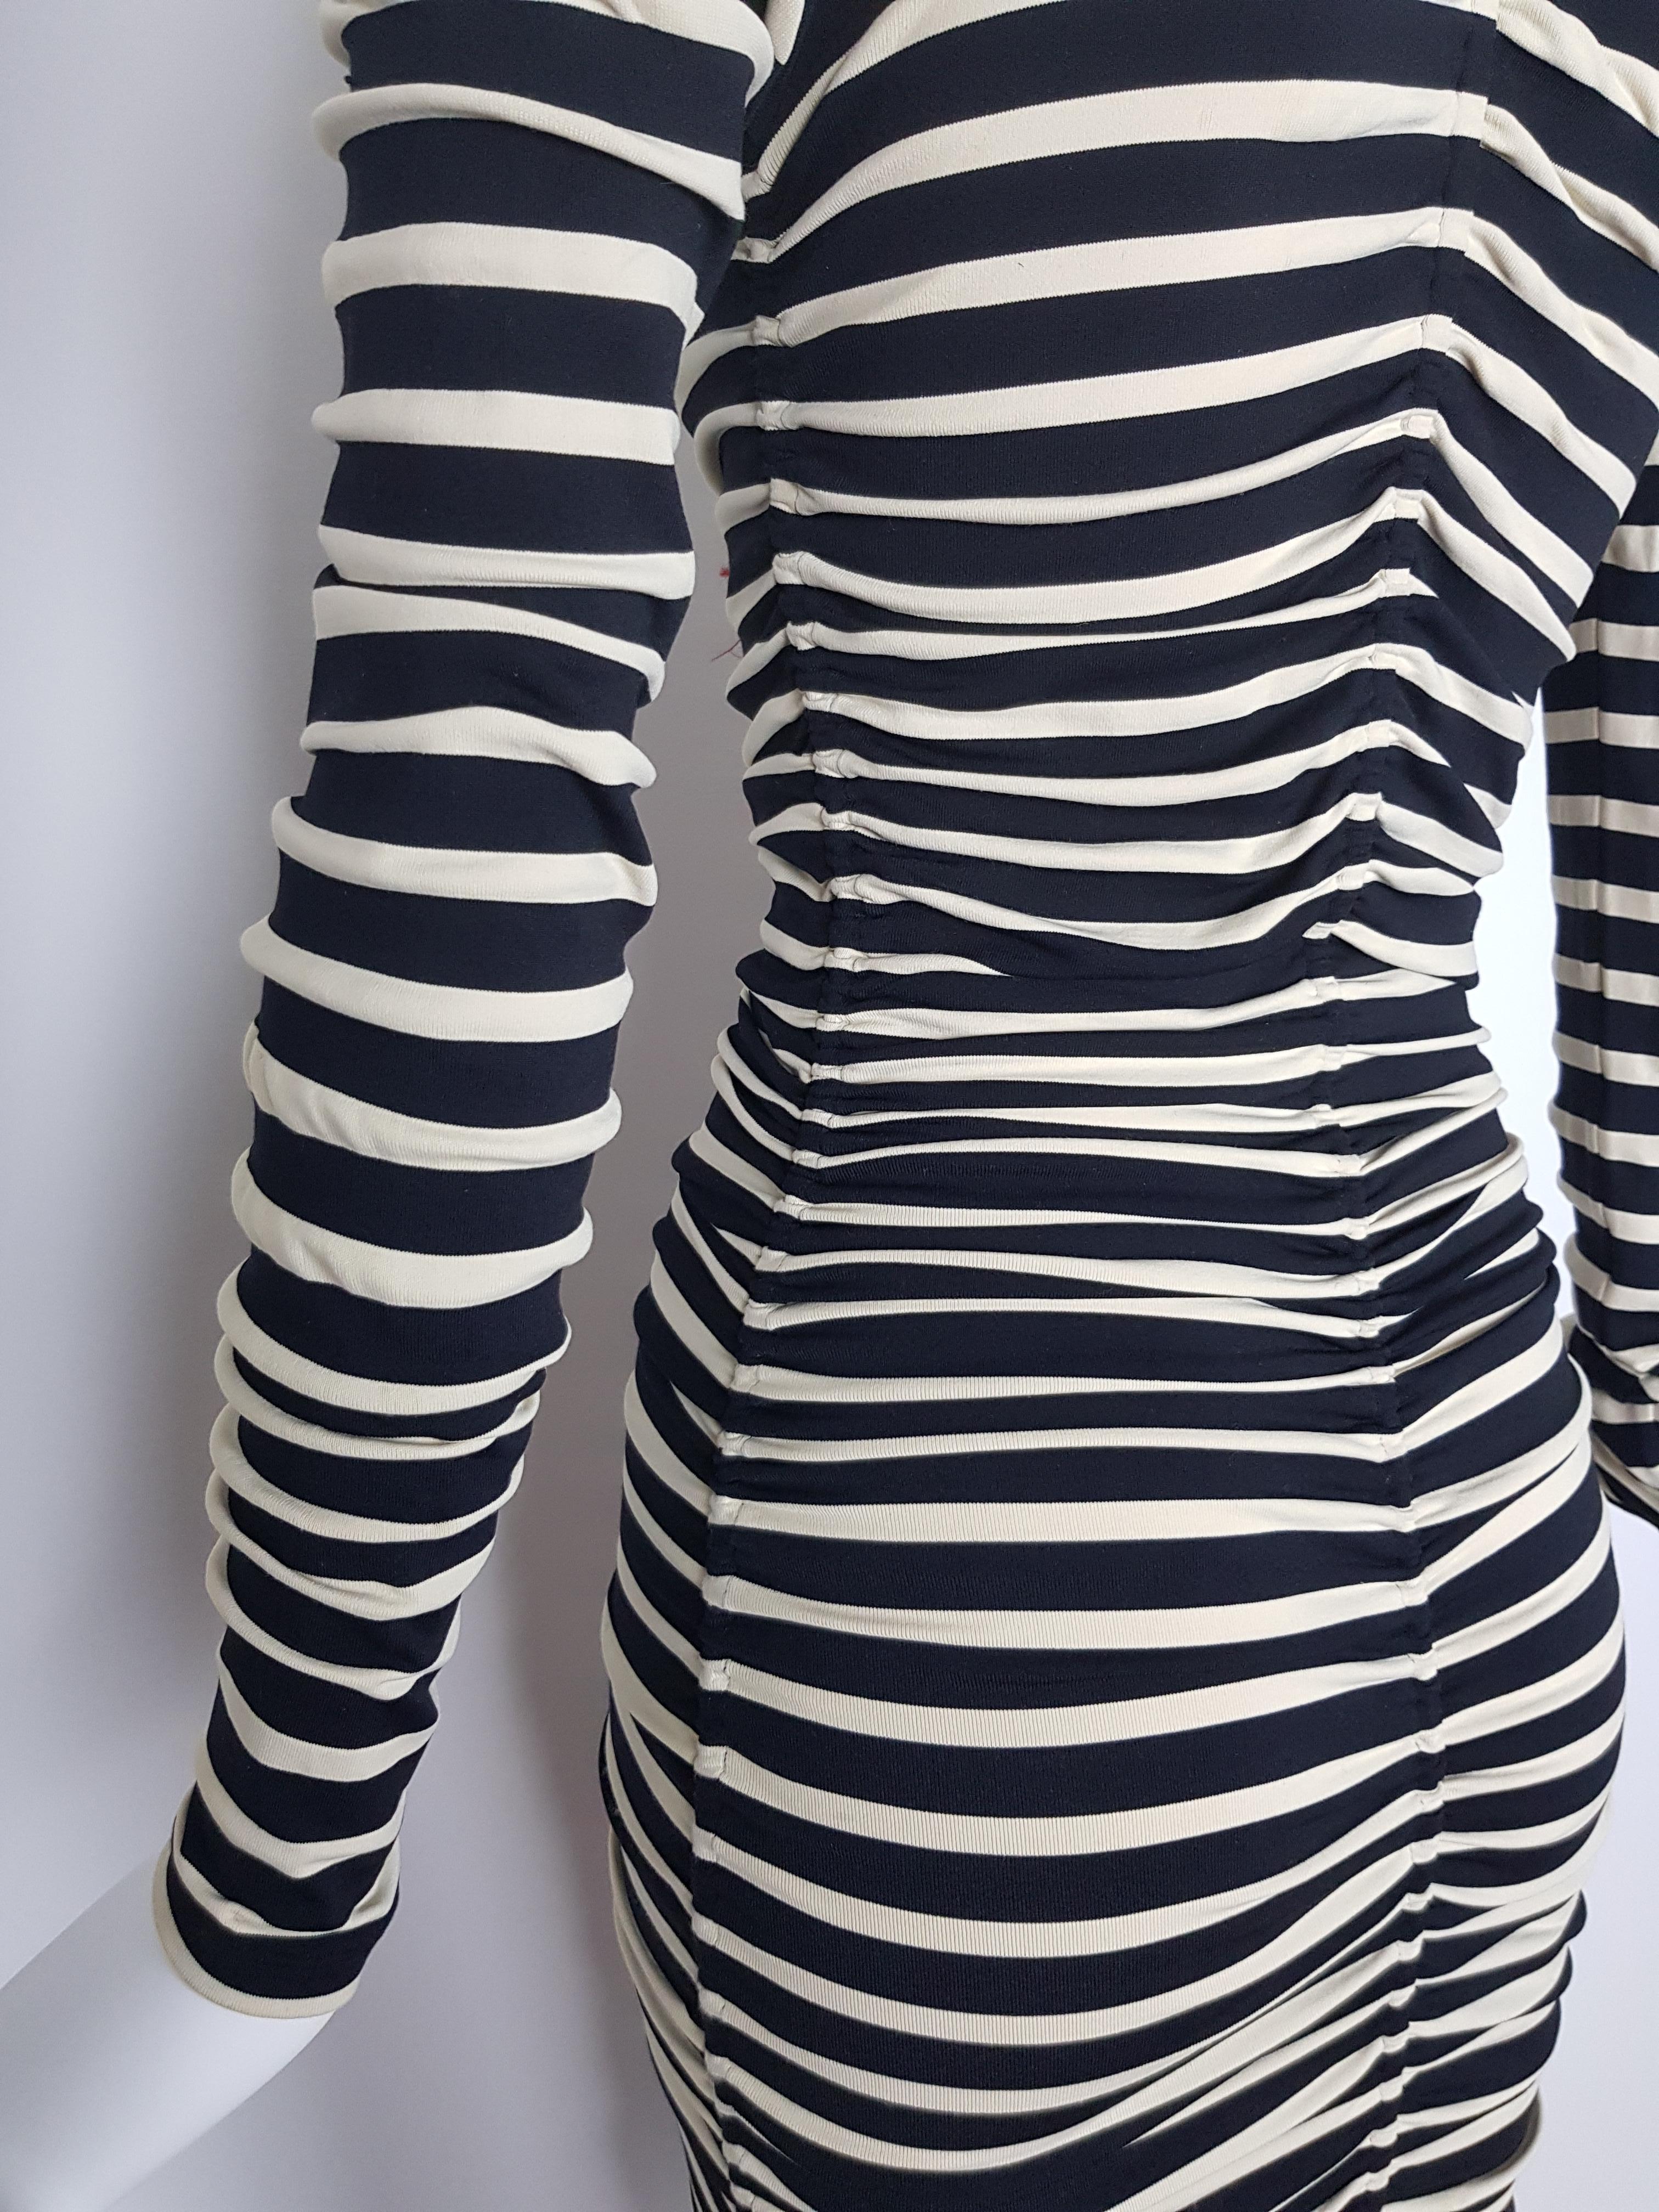 Gray JEAN PAUL GAULTIER Ruched midi dress with stripes and front applique flowers